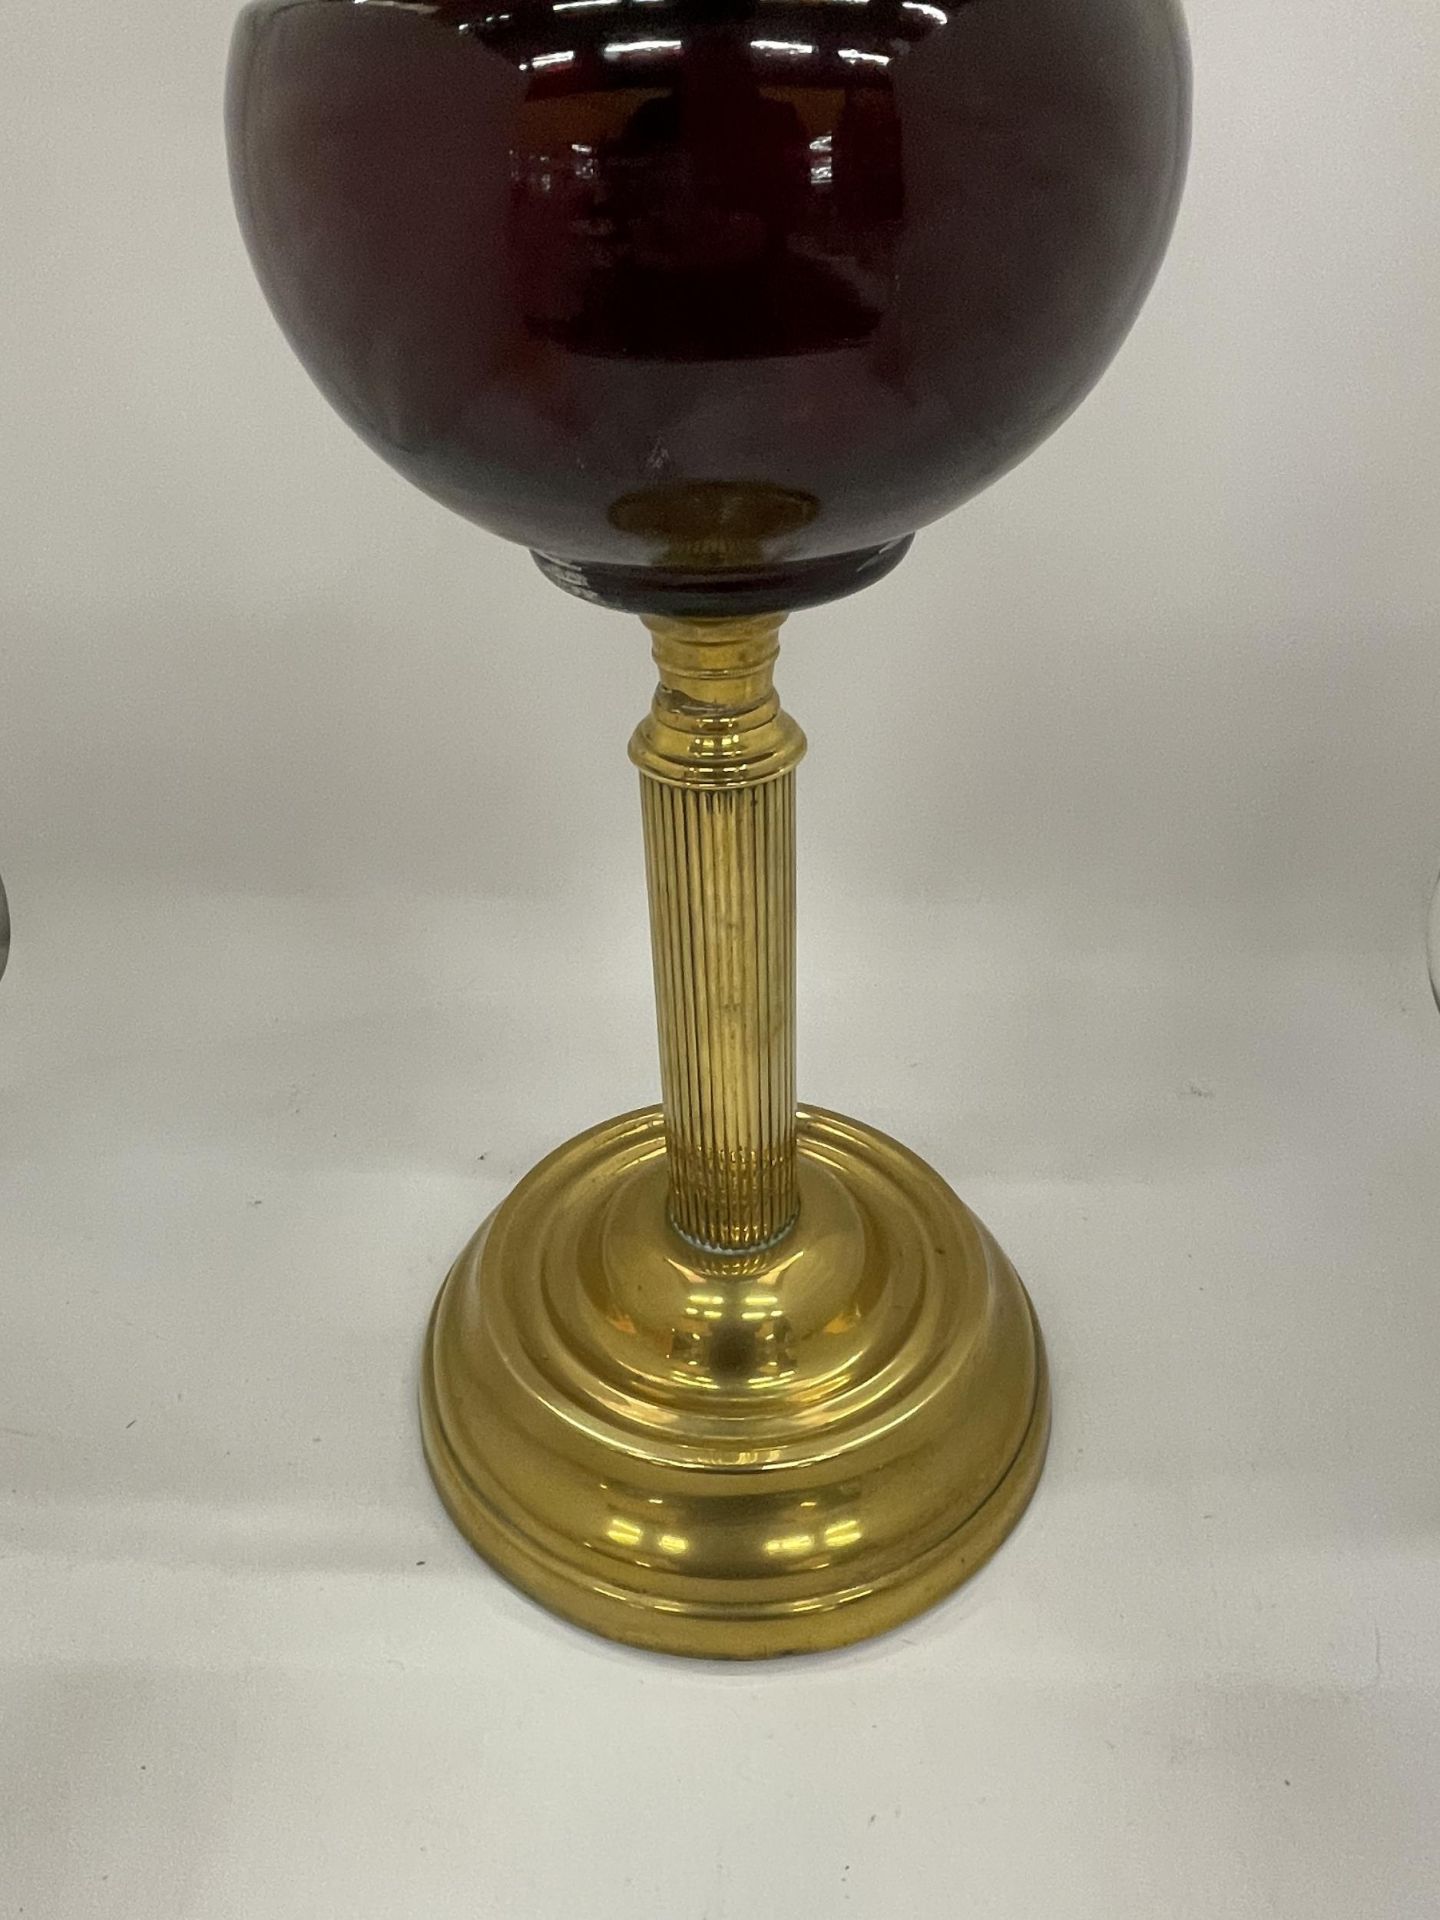 AN EARLY TO MID 20TH CENTURY BRASS CORINTHIAN COLUMN OIL LAMP WITH CRANBERRY GLASS SHADE - Image 3 of 3